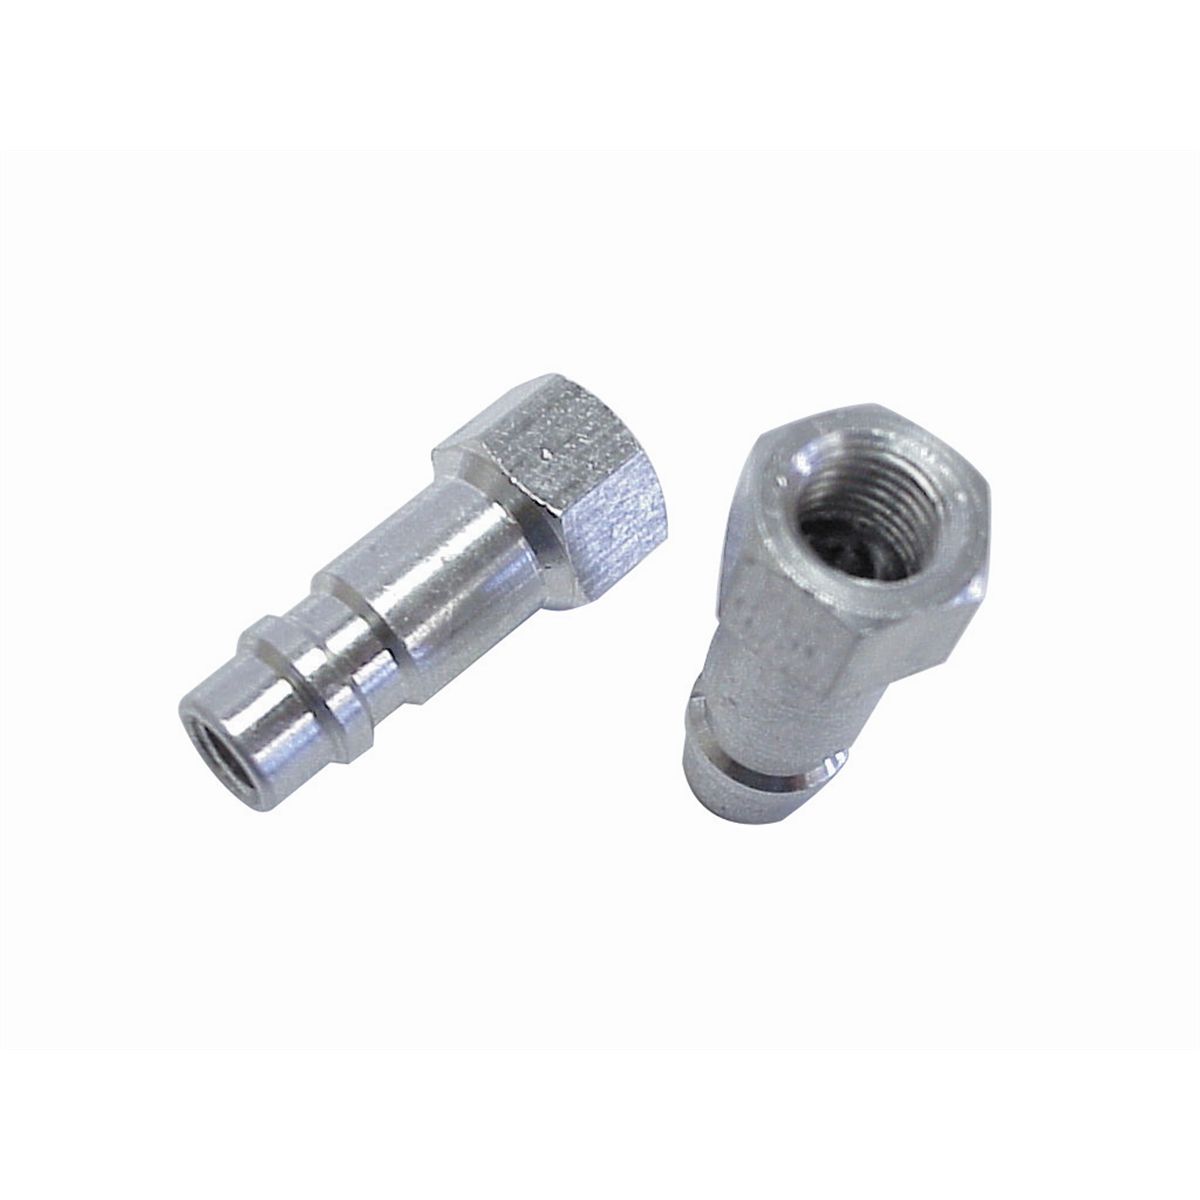 Low Side Conversion Fittings R12 & R134a - 5-Pack